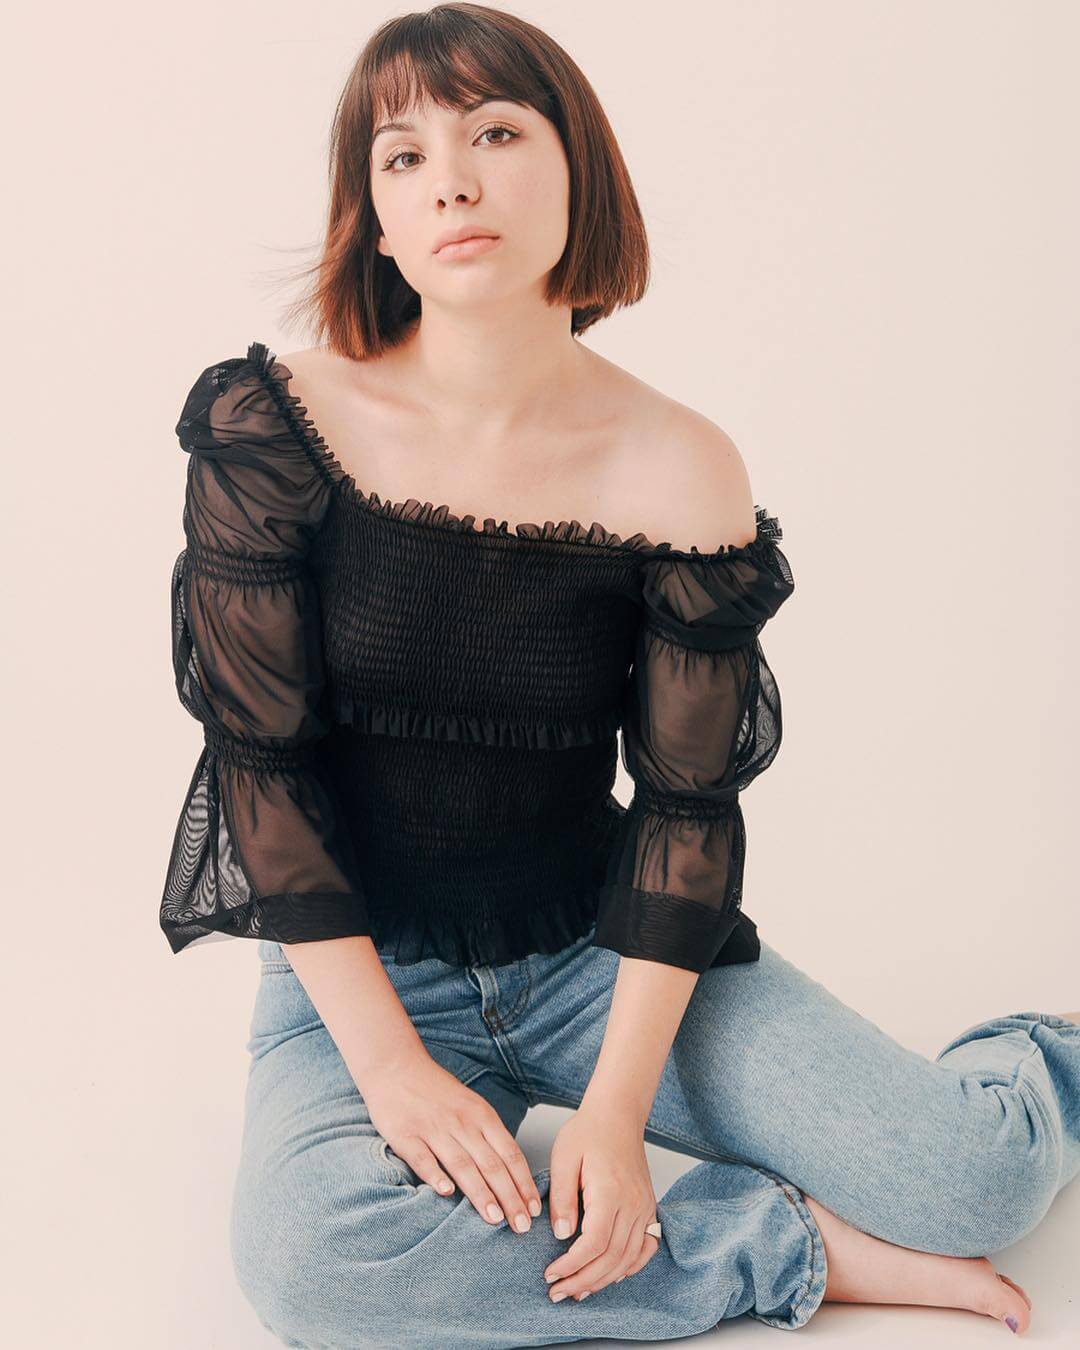 A Denim Love - Hannah Marks Served The Perfect Chic Look In A Black Top And Contrasting Blue Denim